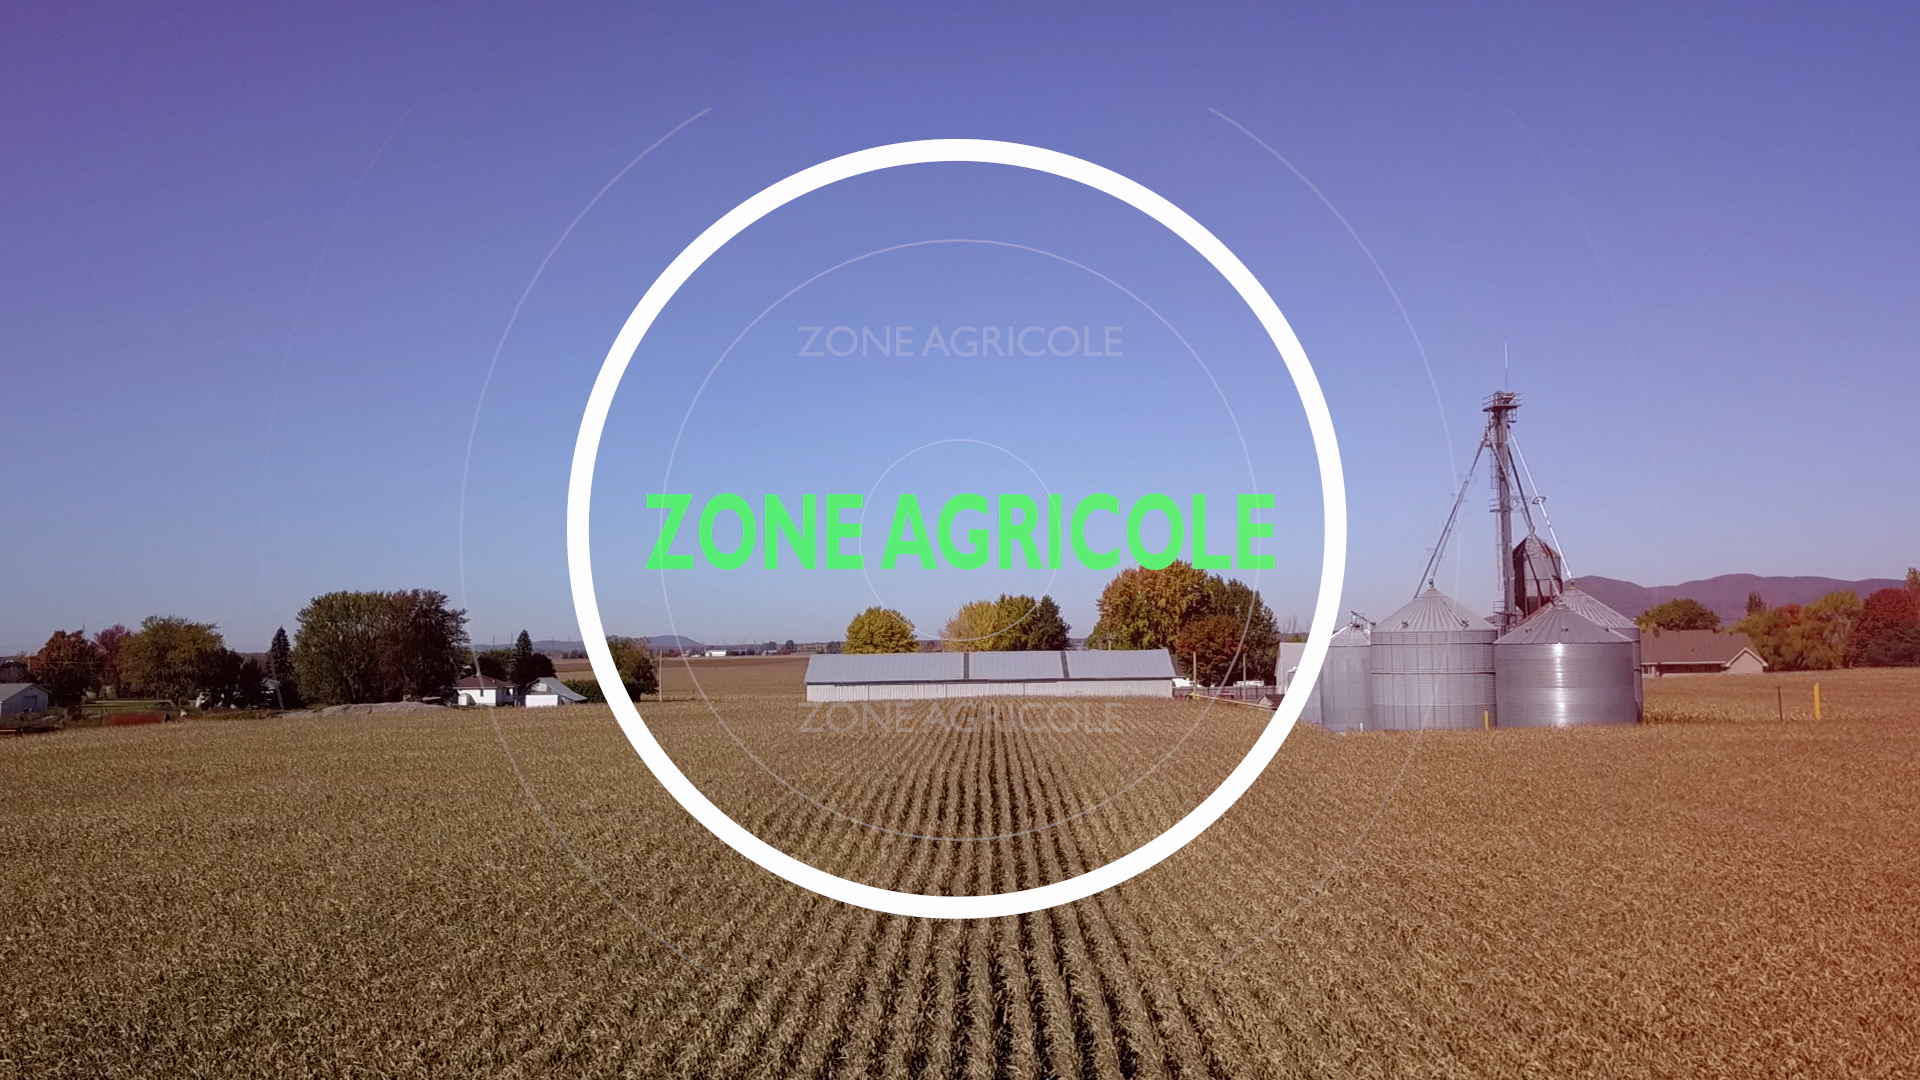 Zone agricole